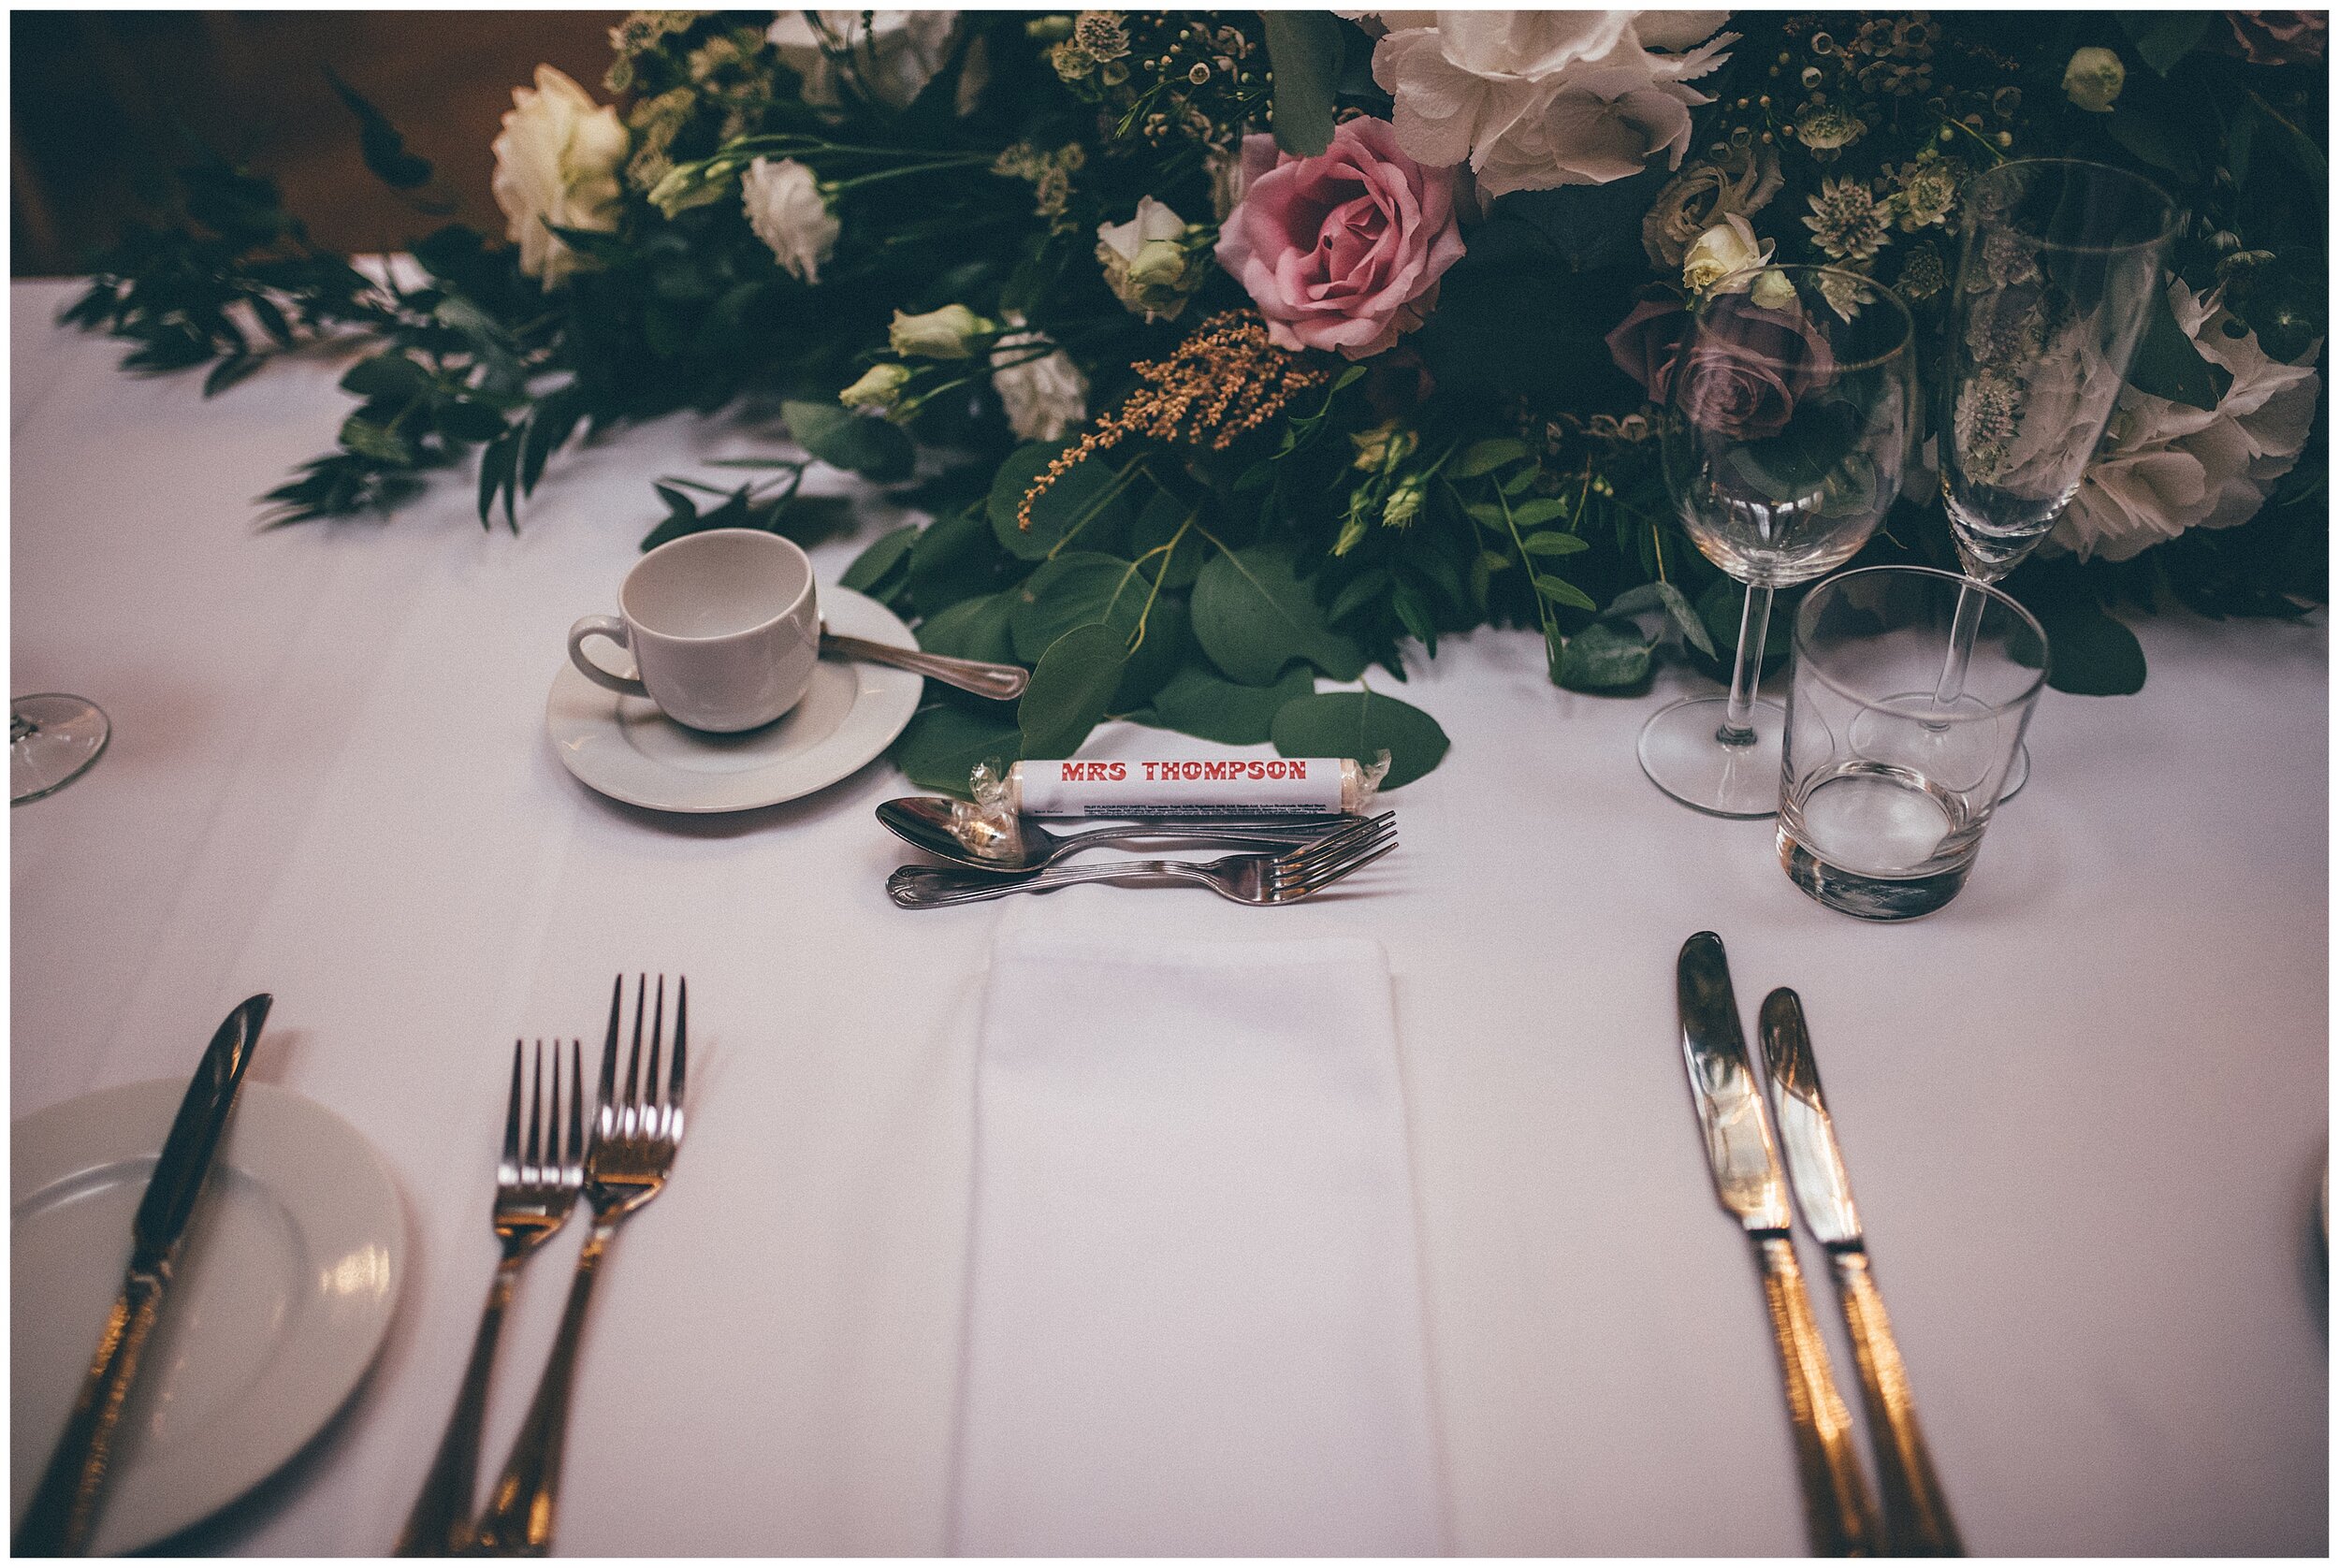 Gorgeous gin themed wedding breakfast room set up at Thornton Manor, with personalised Love Heart sweets.